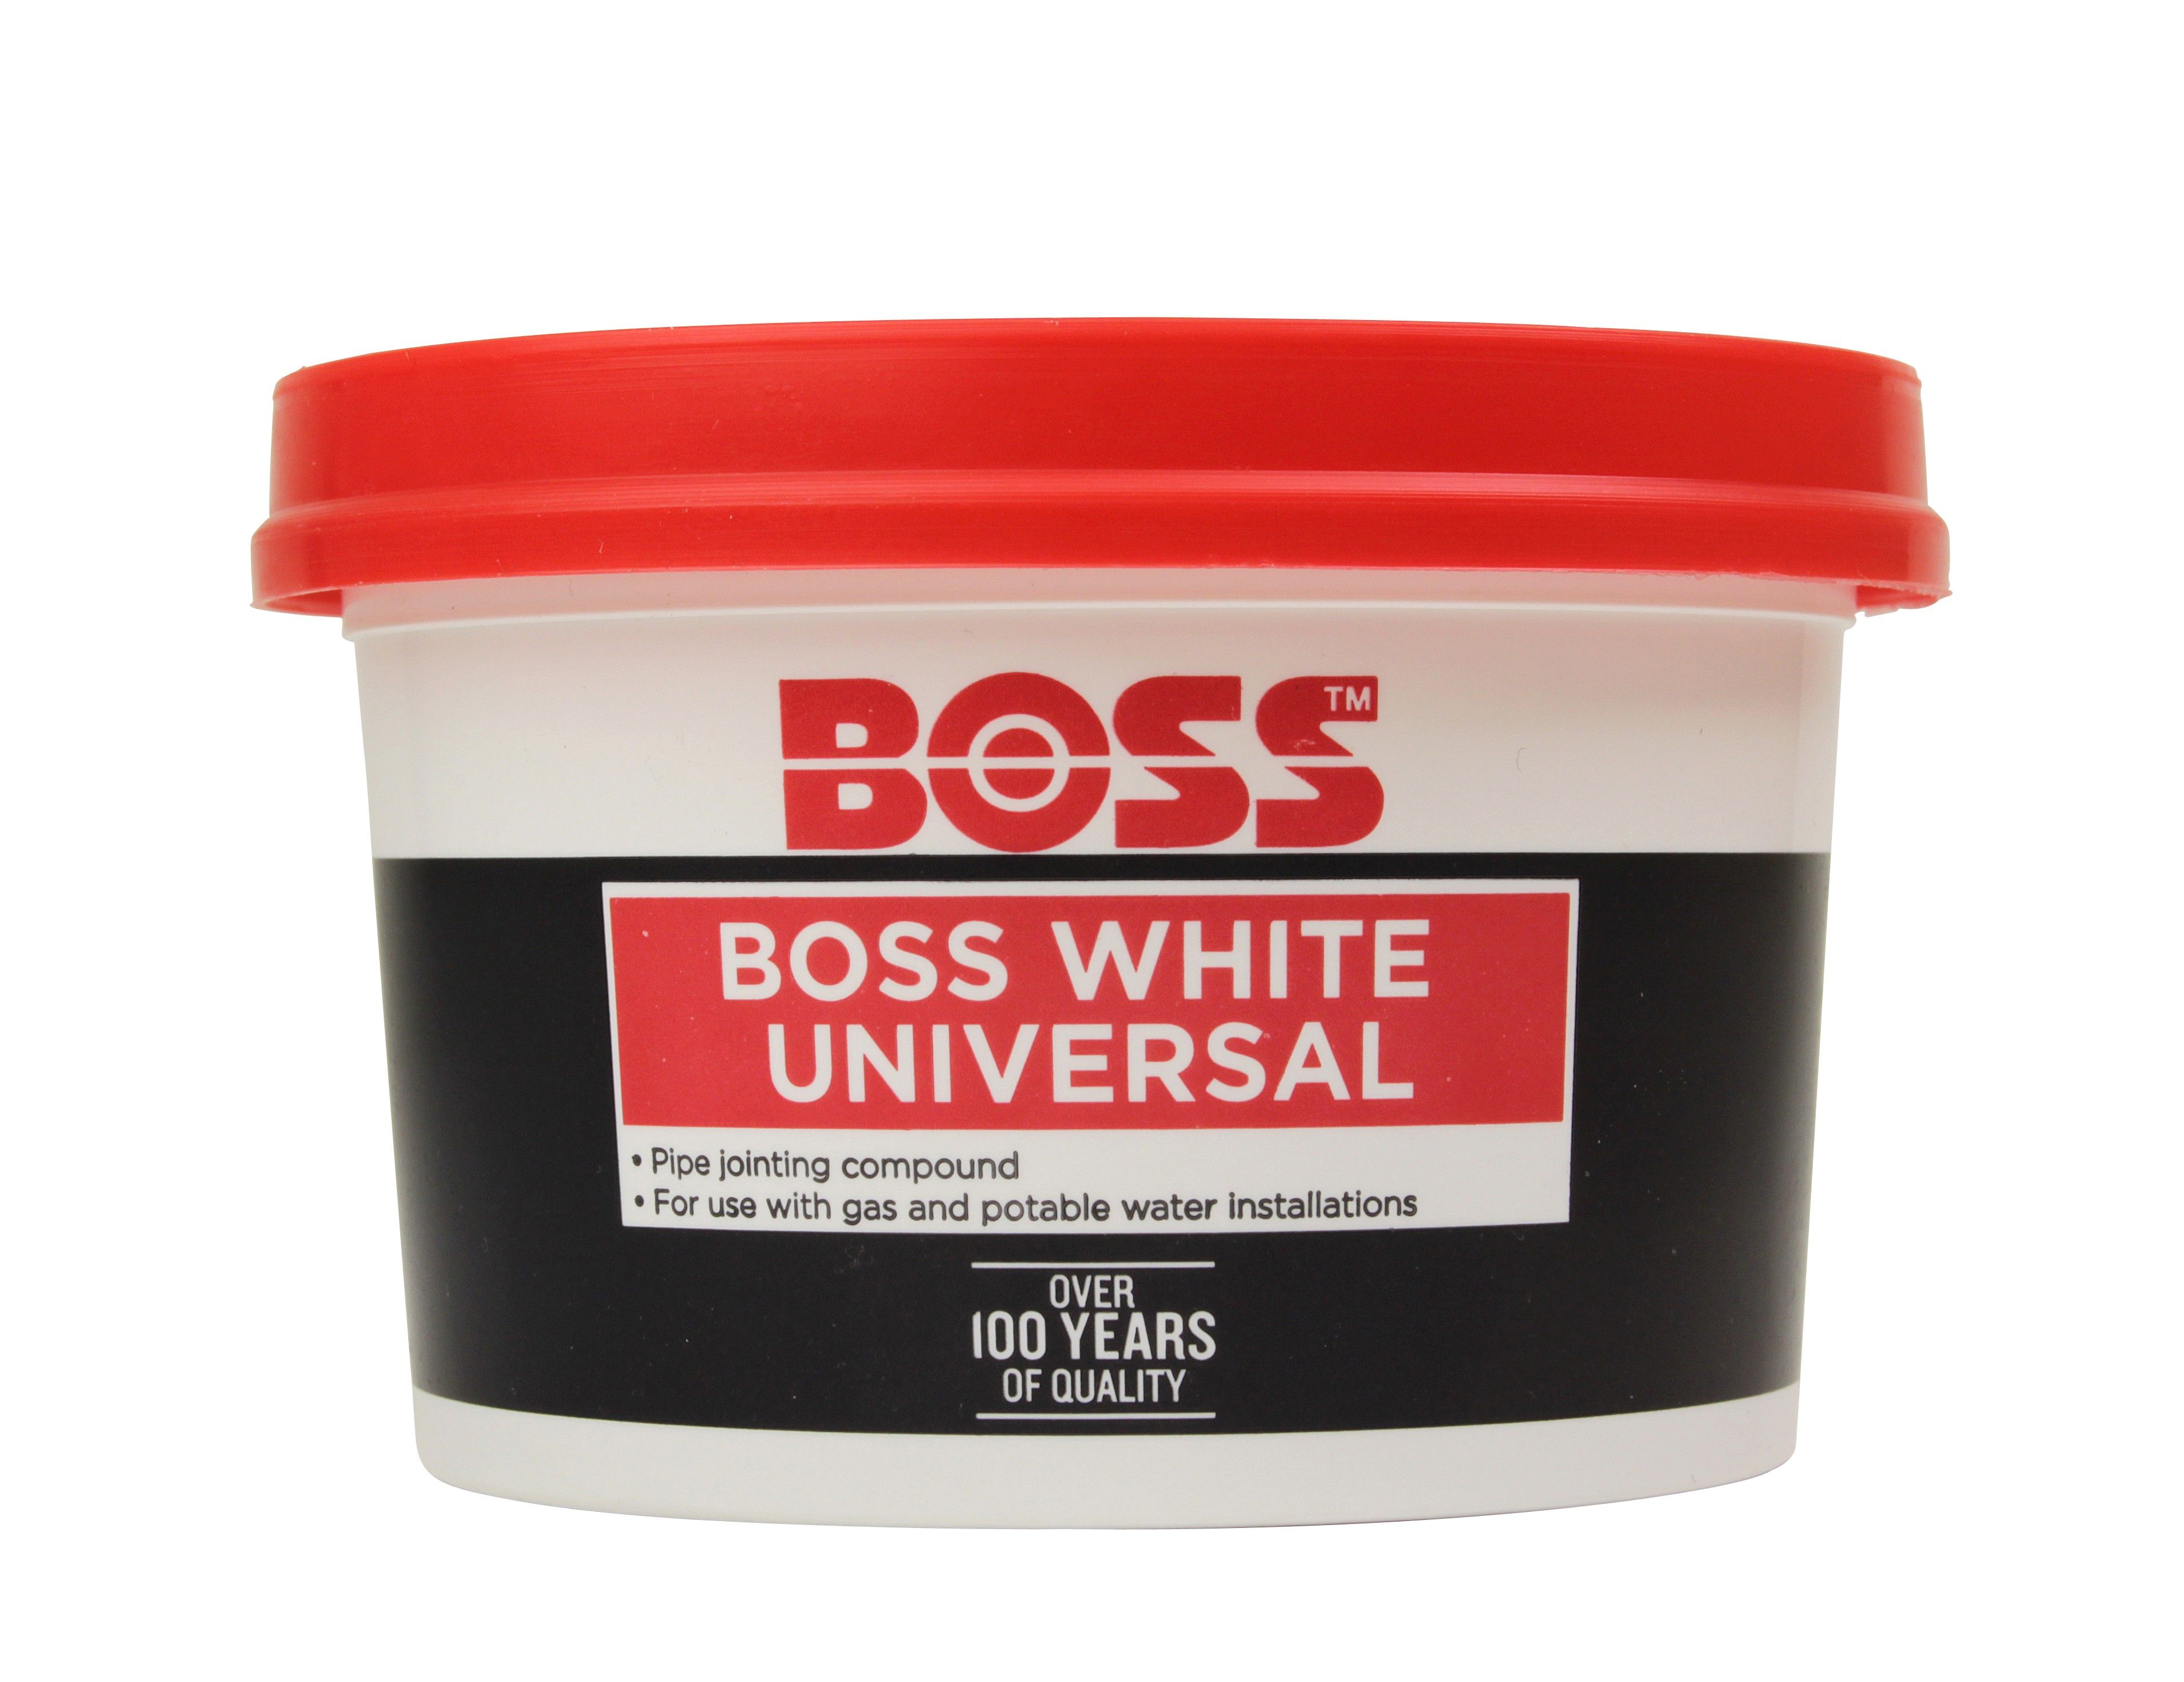 BOSS™ White Universal Jointing Compound